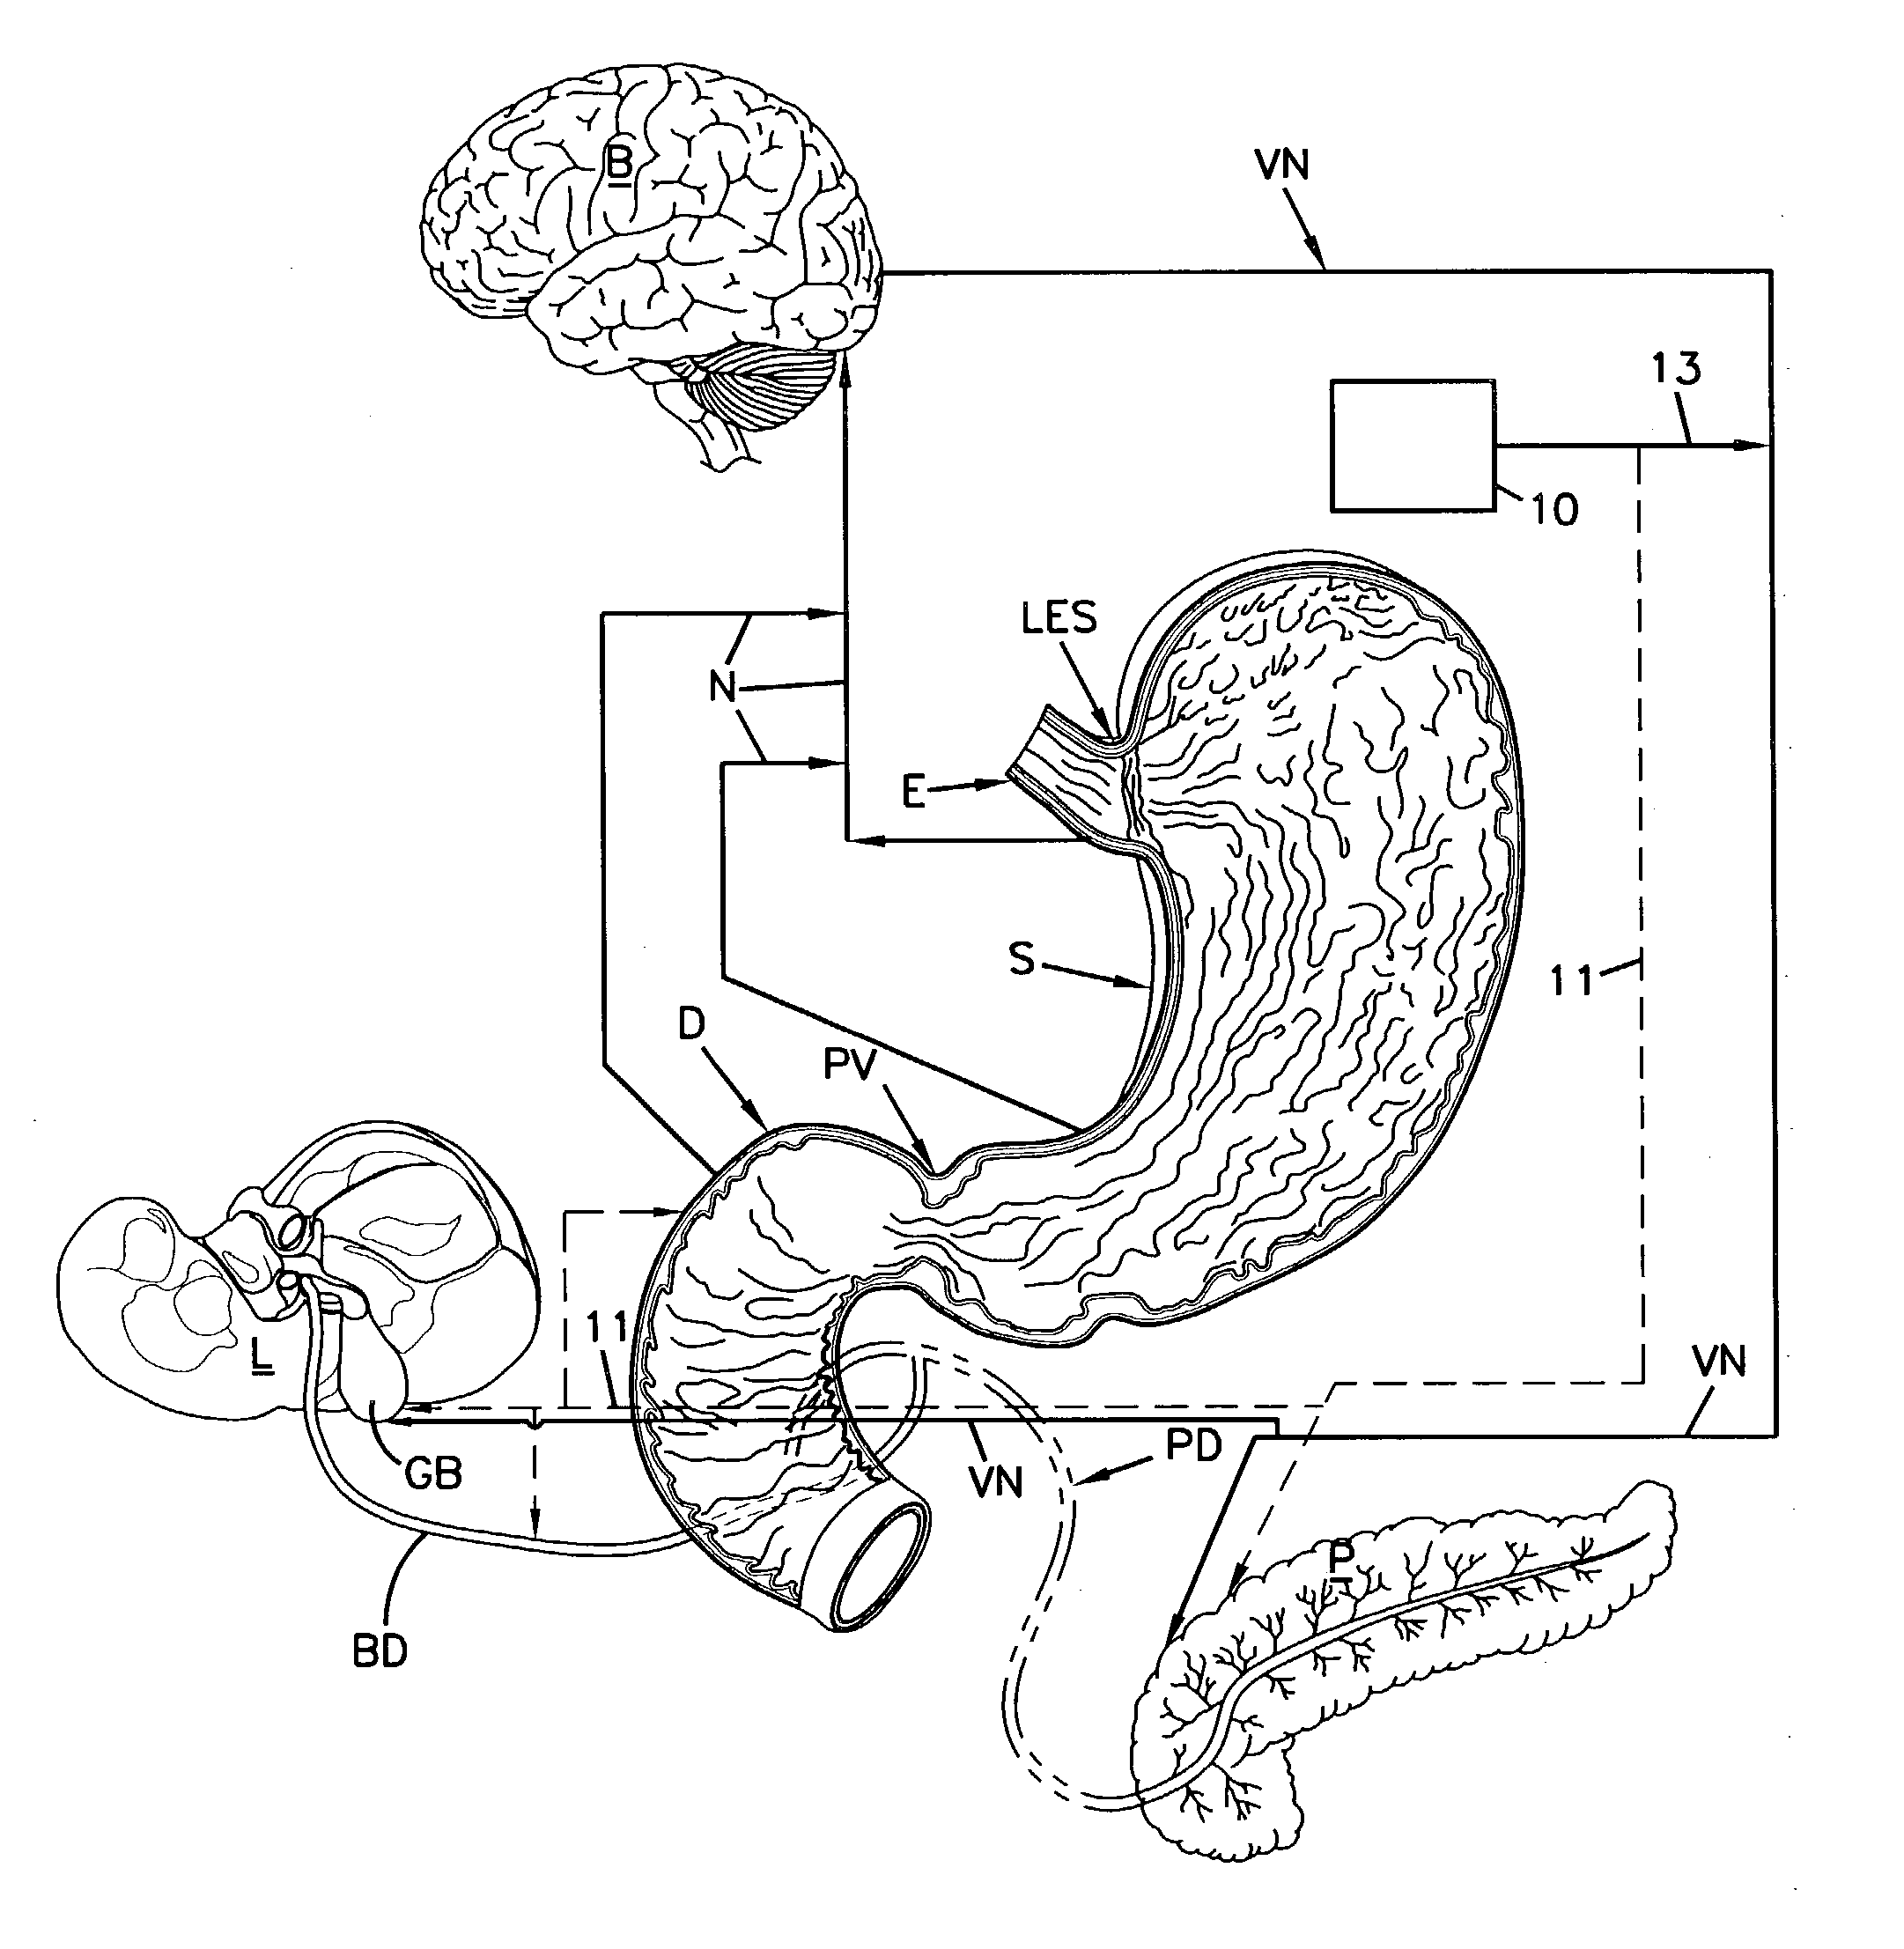 Method and apparatus for treatment of gastro-esophageal reflux disease (GERD)